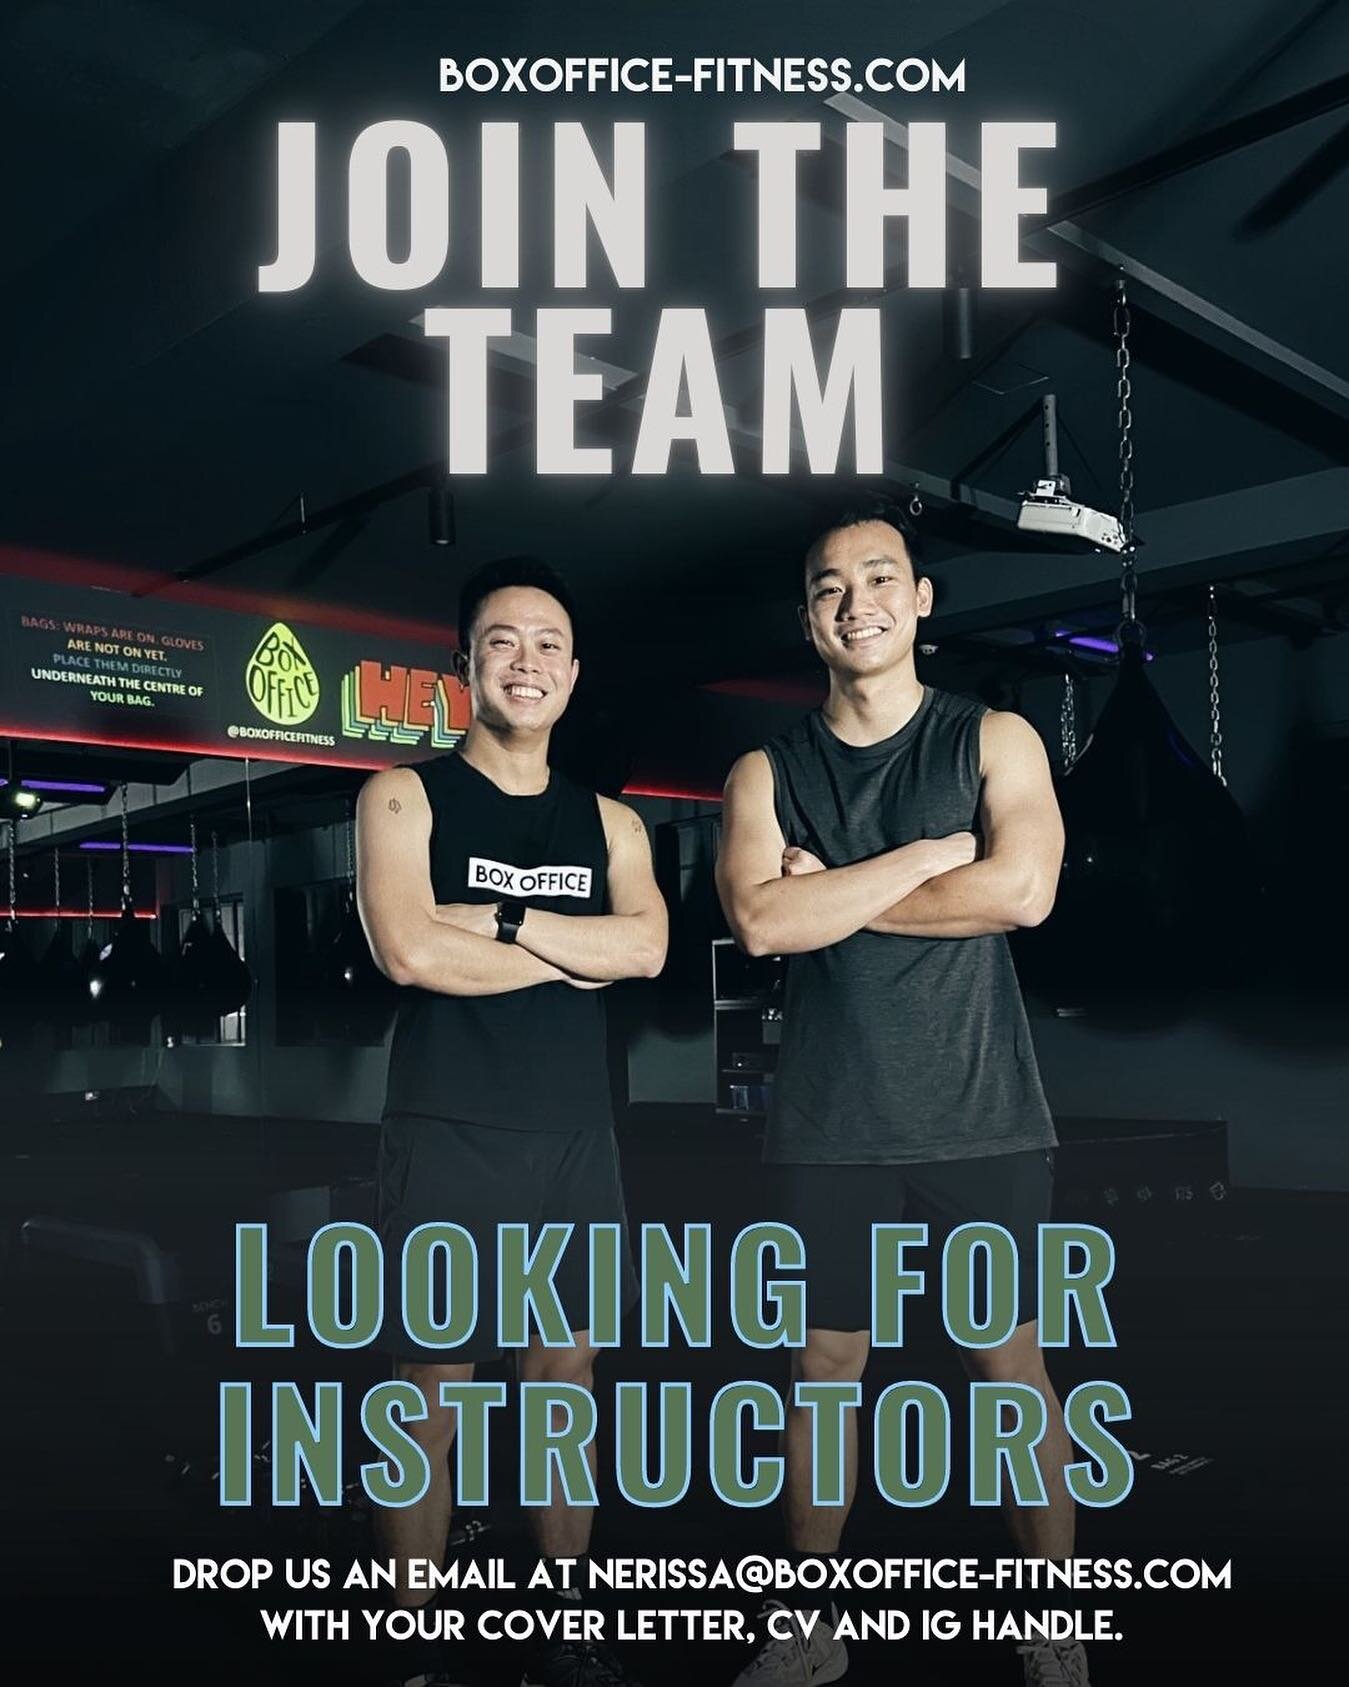 We are looking for new blood to be part of our growing team.⁣ 🤩🤩
⁣
If you are passionate about inspiring through fitness and confident about your ability to lead and command a room, drop us an email! ⁣
⁣
Email us at nerissa@boxoffice-fitness.com wi